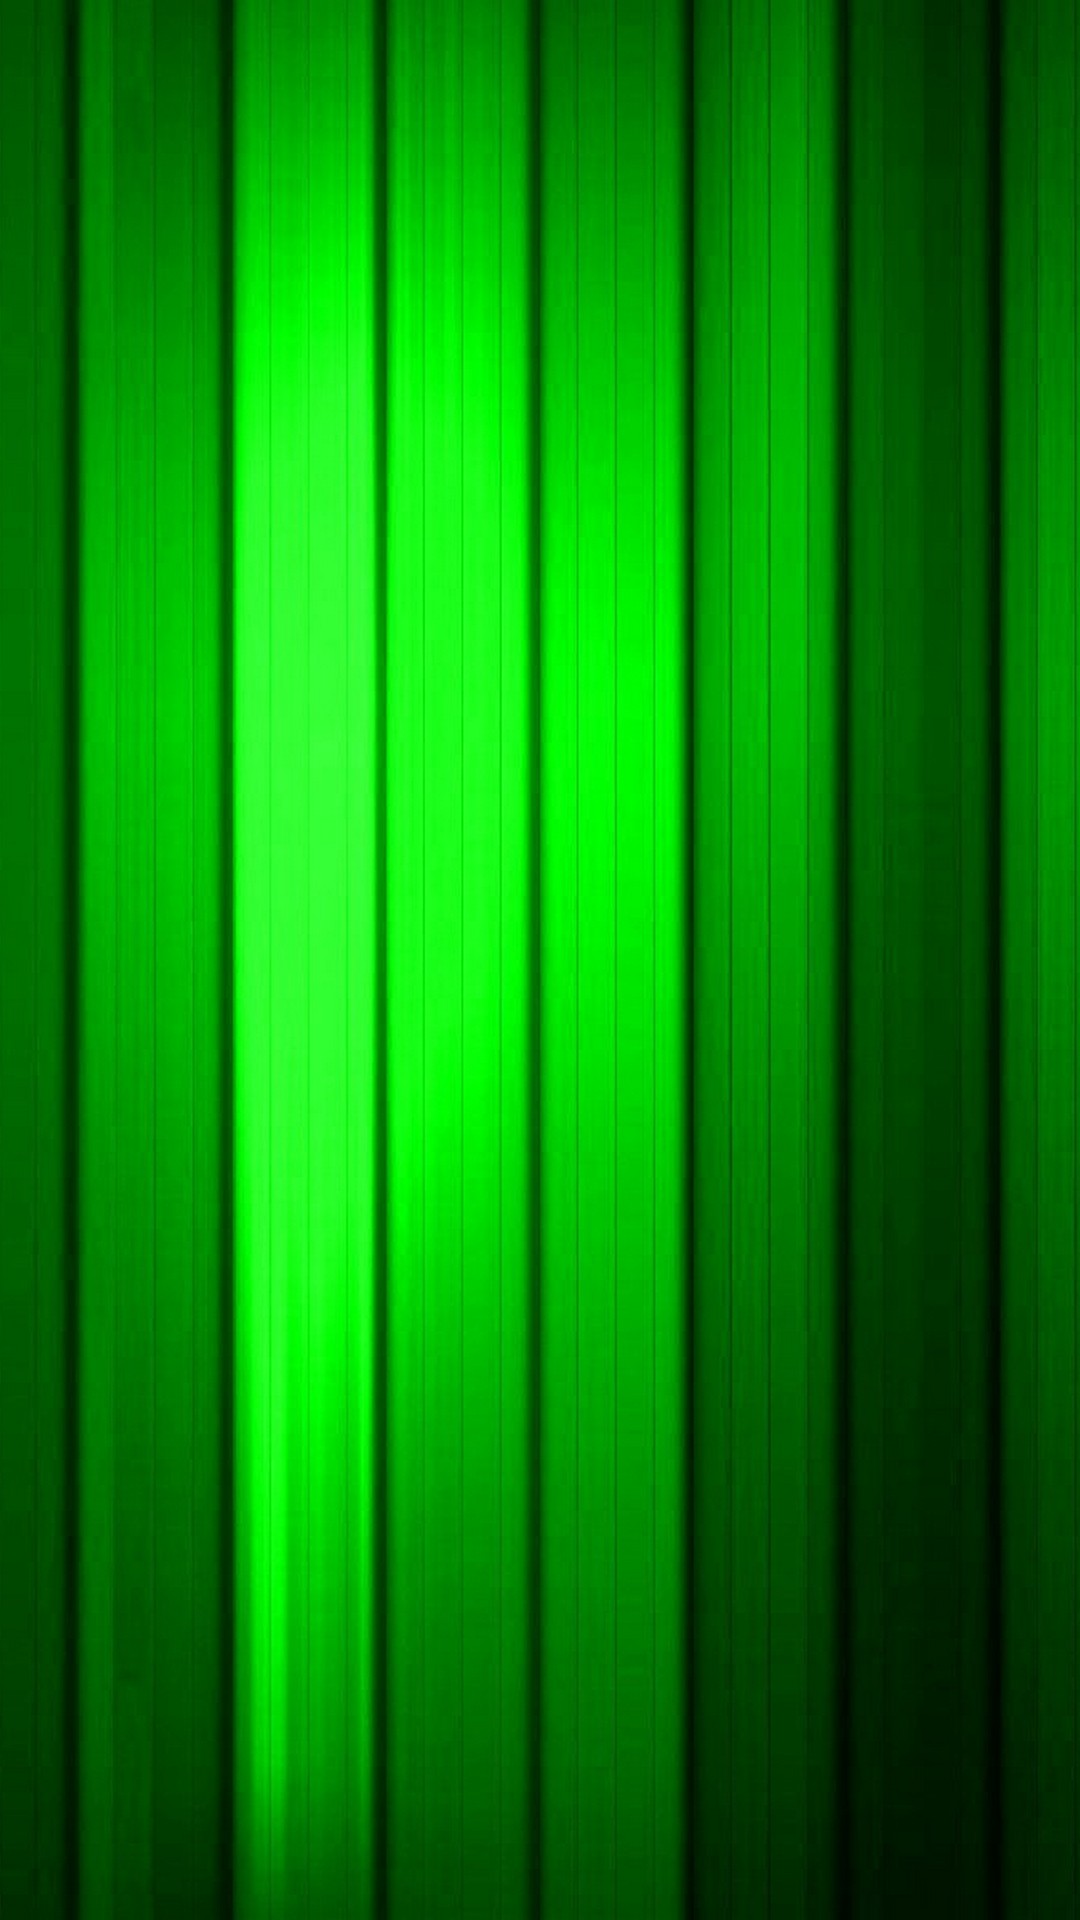 Neon Green Backgrounds For Android with resolution 1080X1920 pixel. You can make this wallpaper for your Android backgrounds, Tablet, Smartphones Screensavers and Mobile Phone Lock Screen